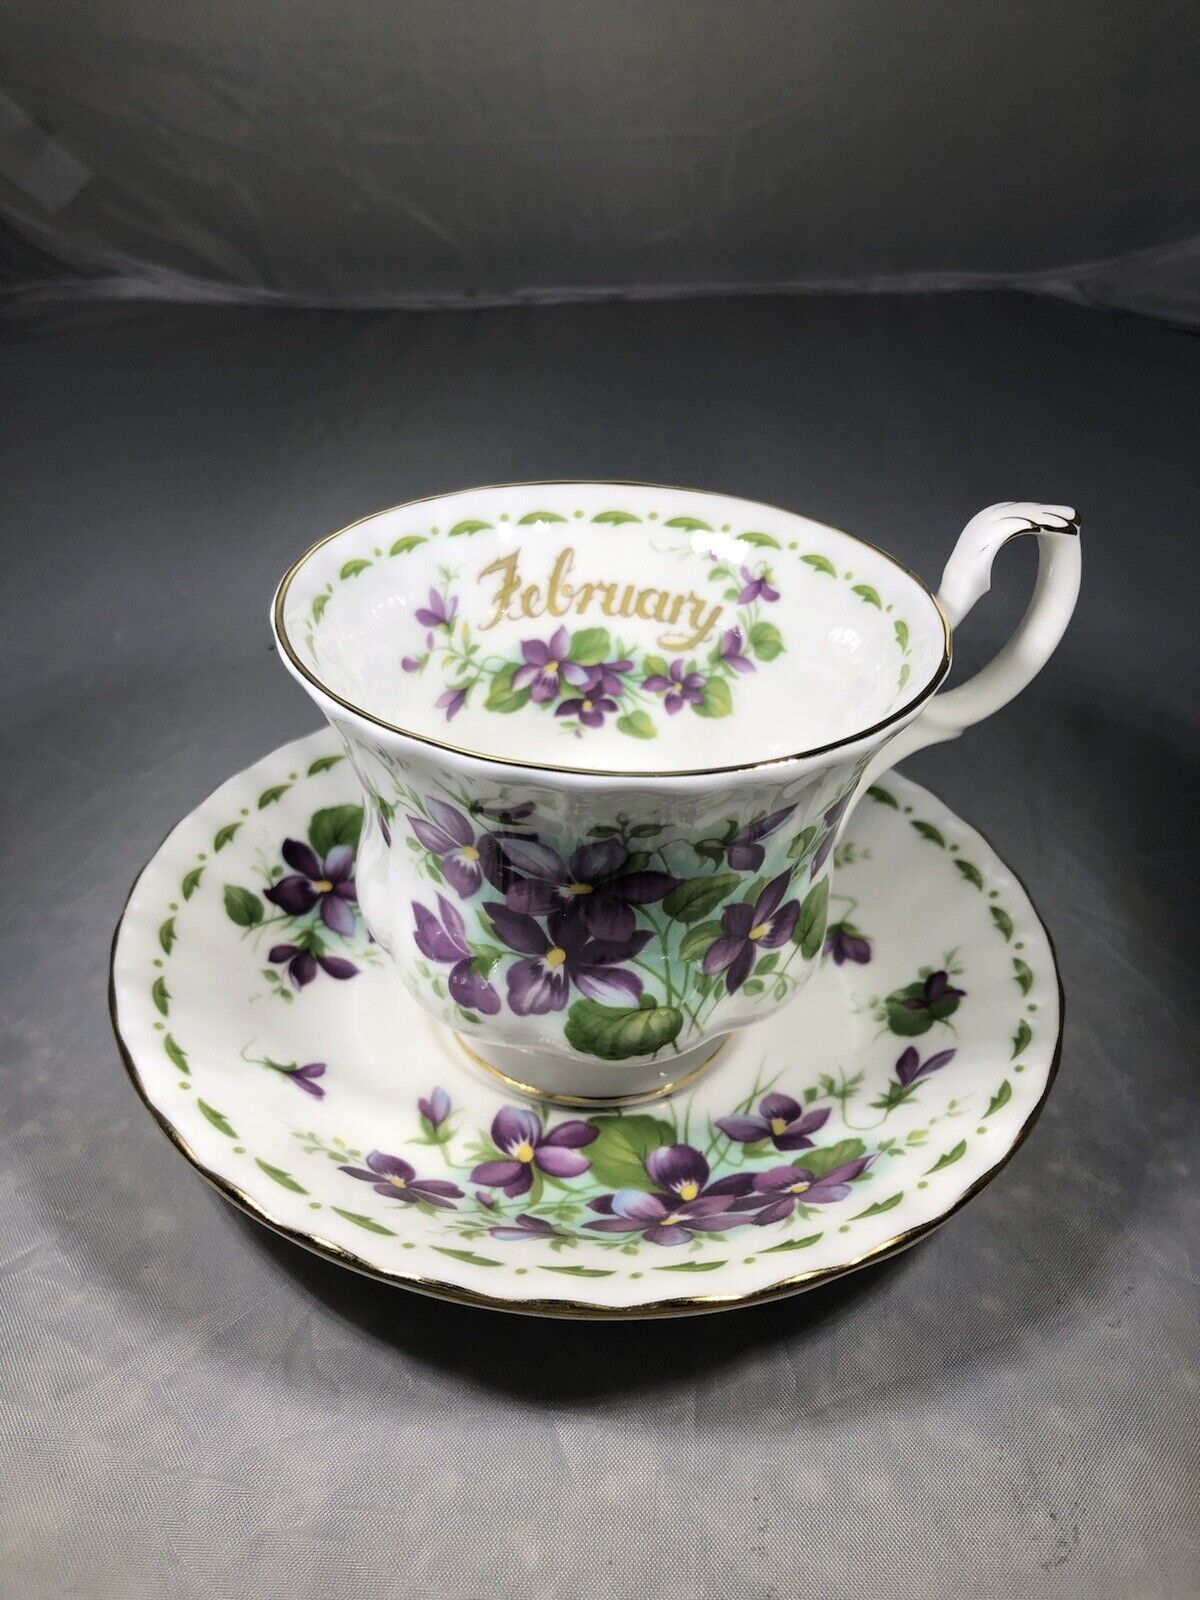 February / Violets - Royal Albert China- Flower of the Month - Cup & Saucer Set